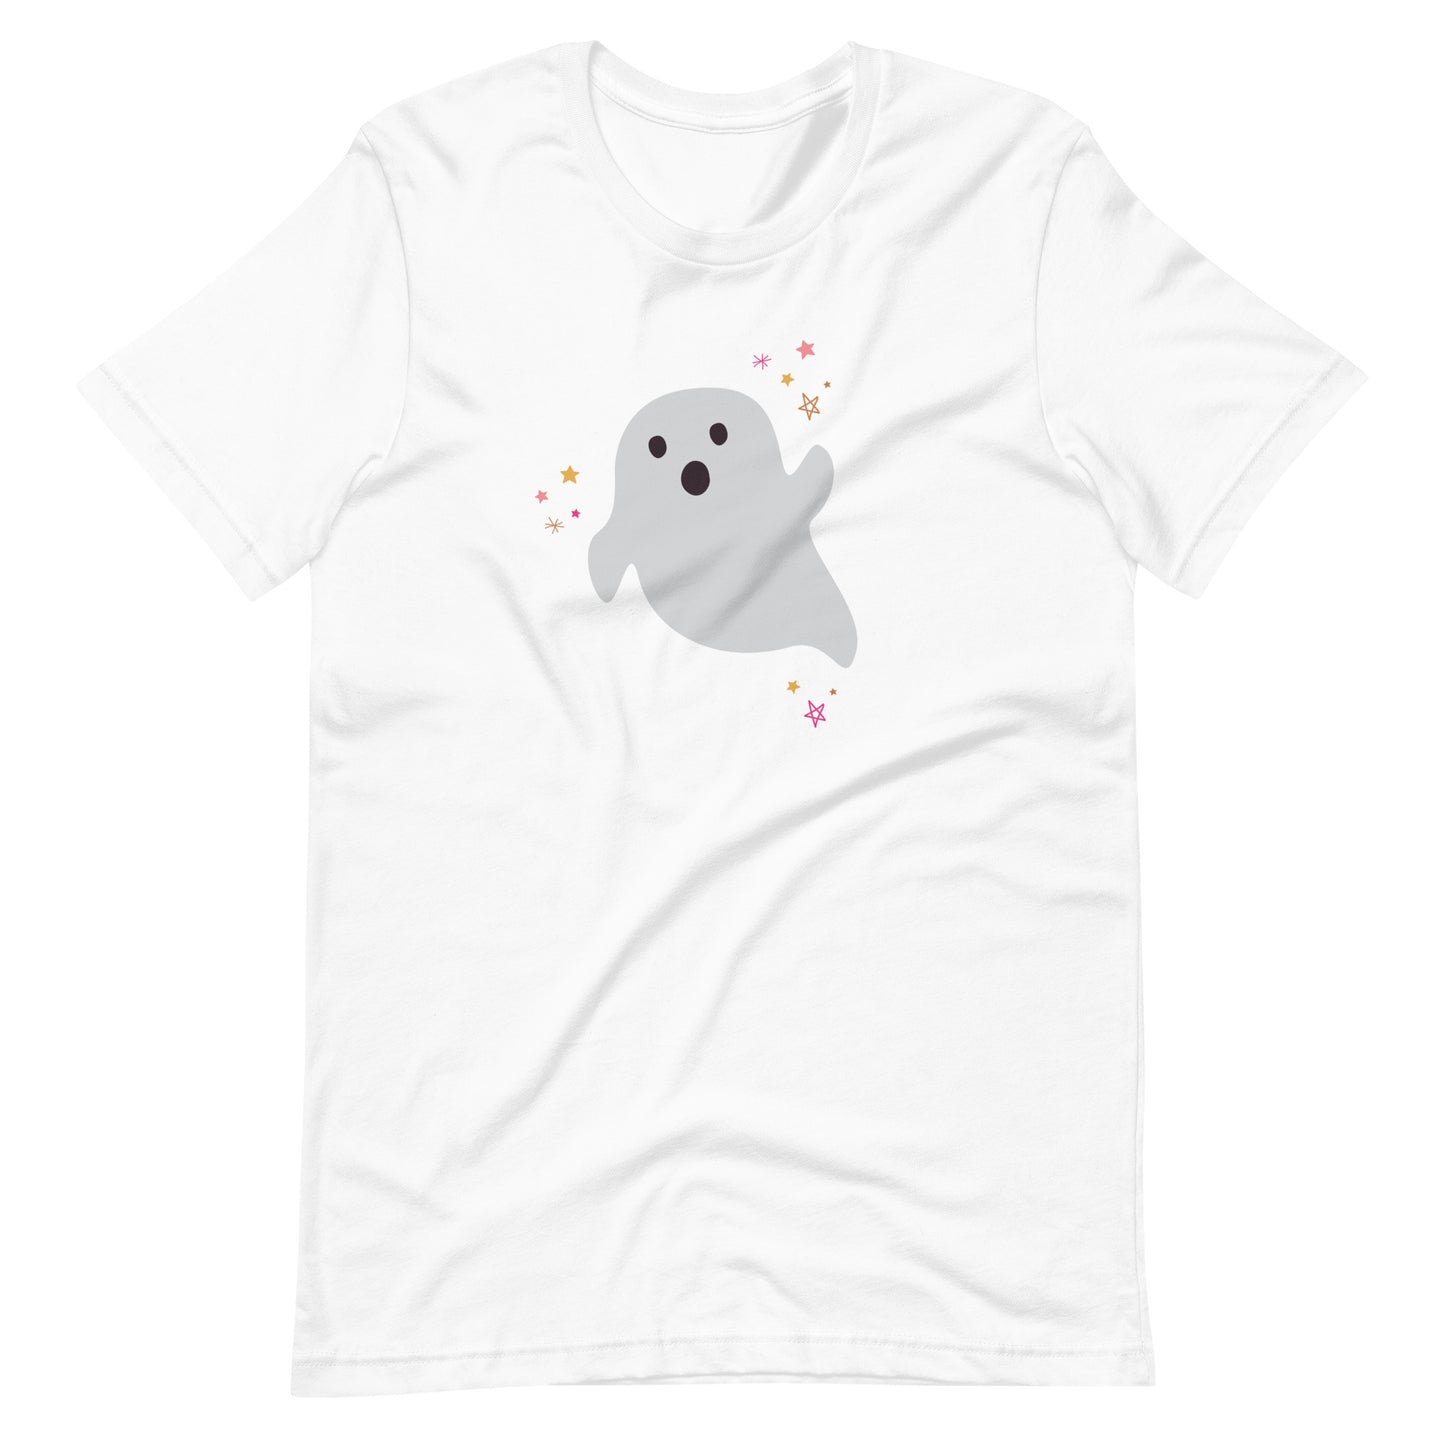 Halloween Ghost Unisex T-Shirt (more colors available)